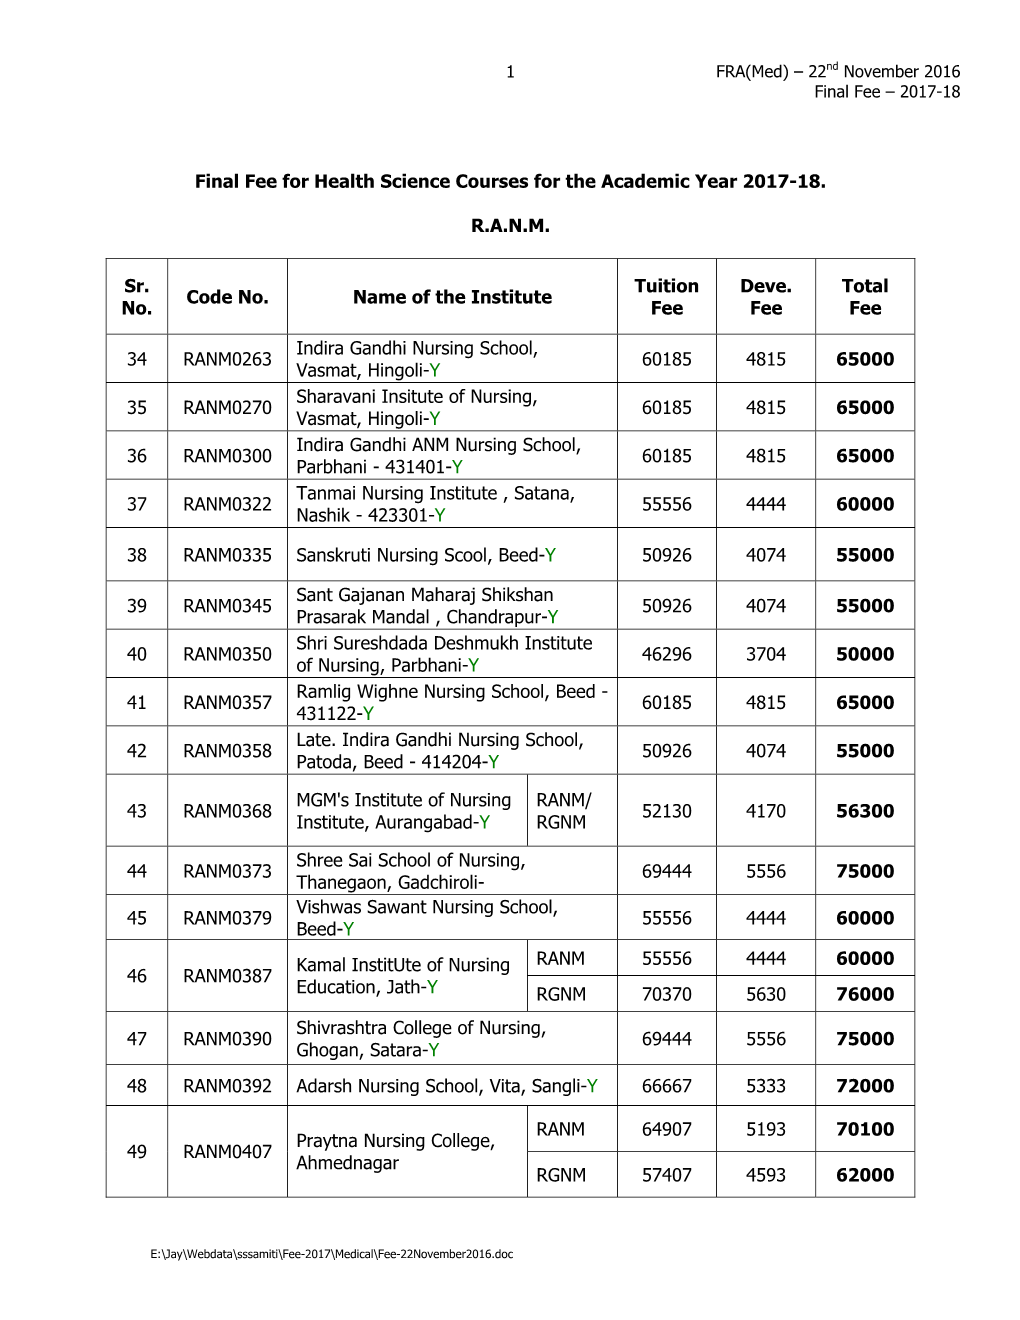 Final Fee for Health Science Courses for the Academic Year 2017-18. R.A.N.M. Sr. No. Code No. Name of the Institute Tuition